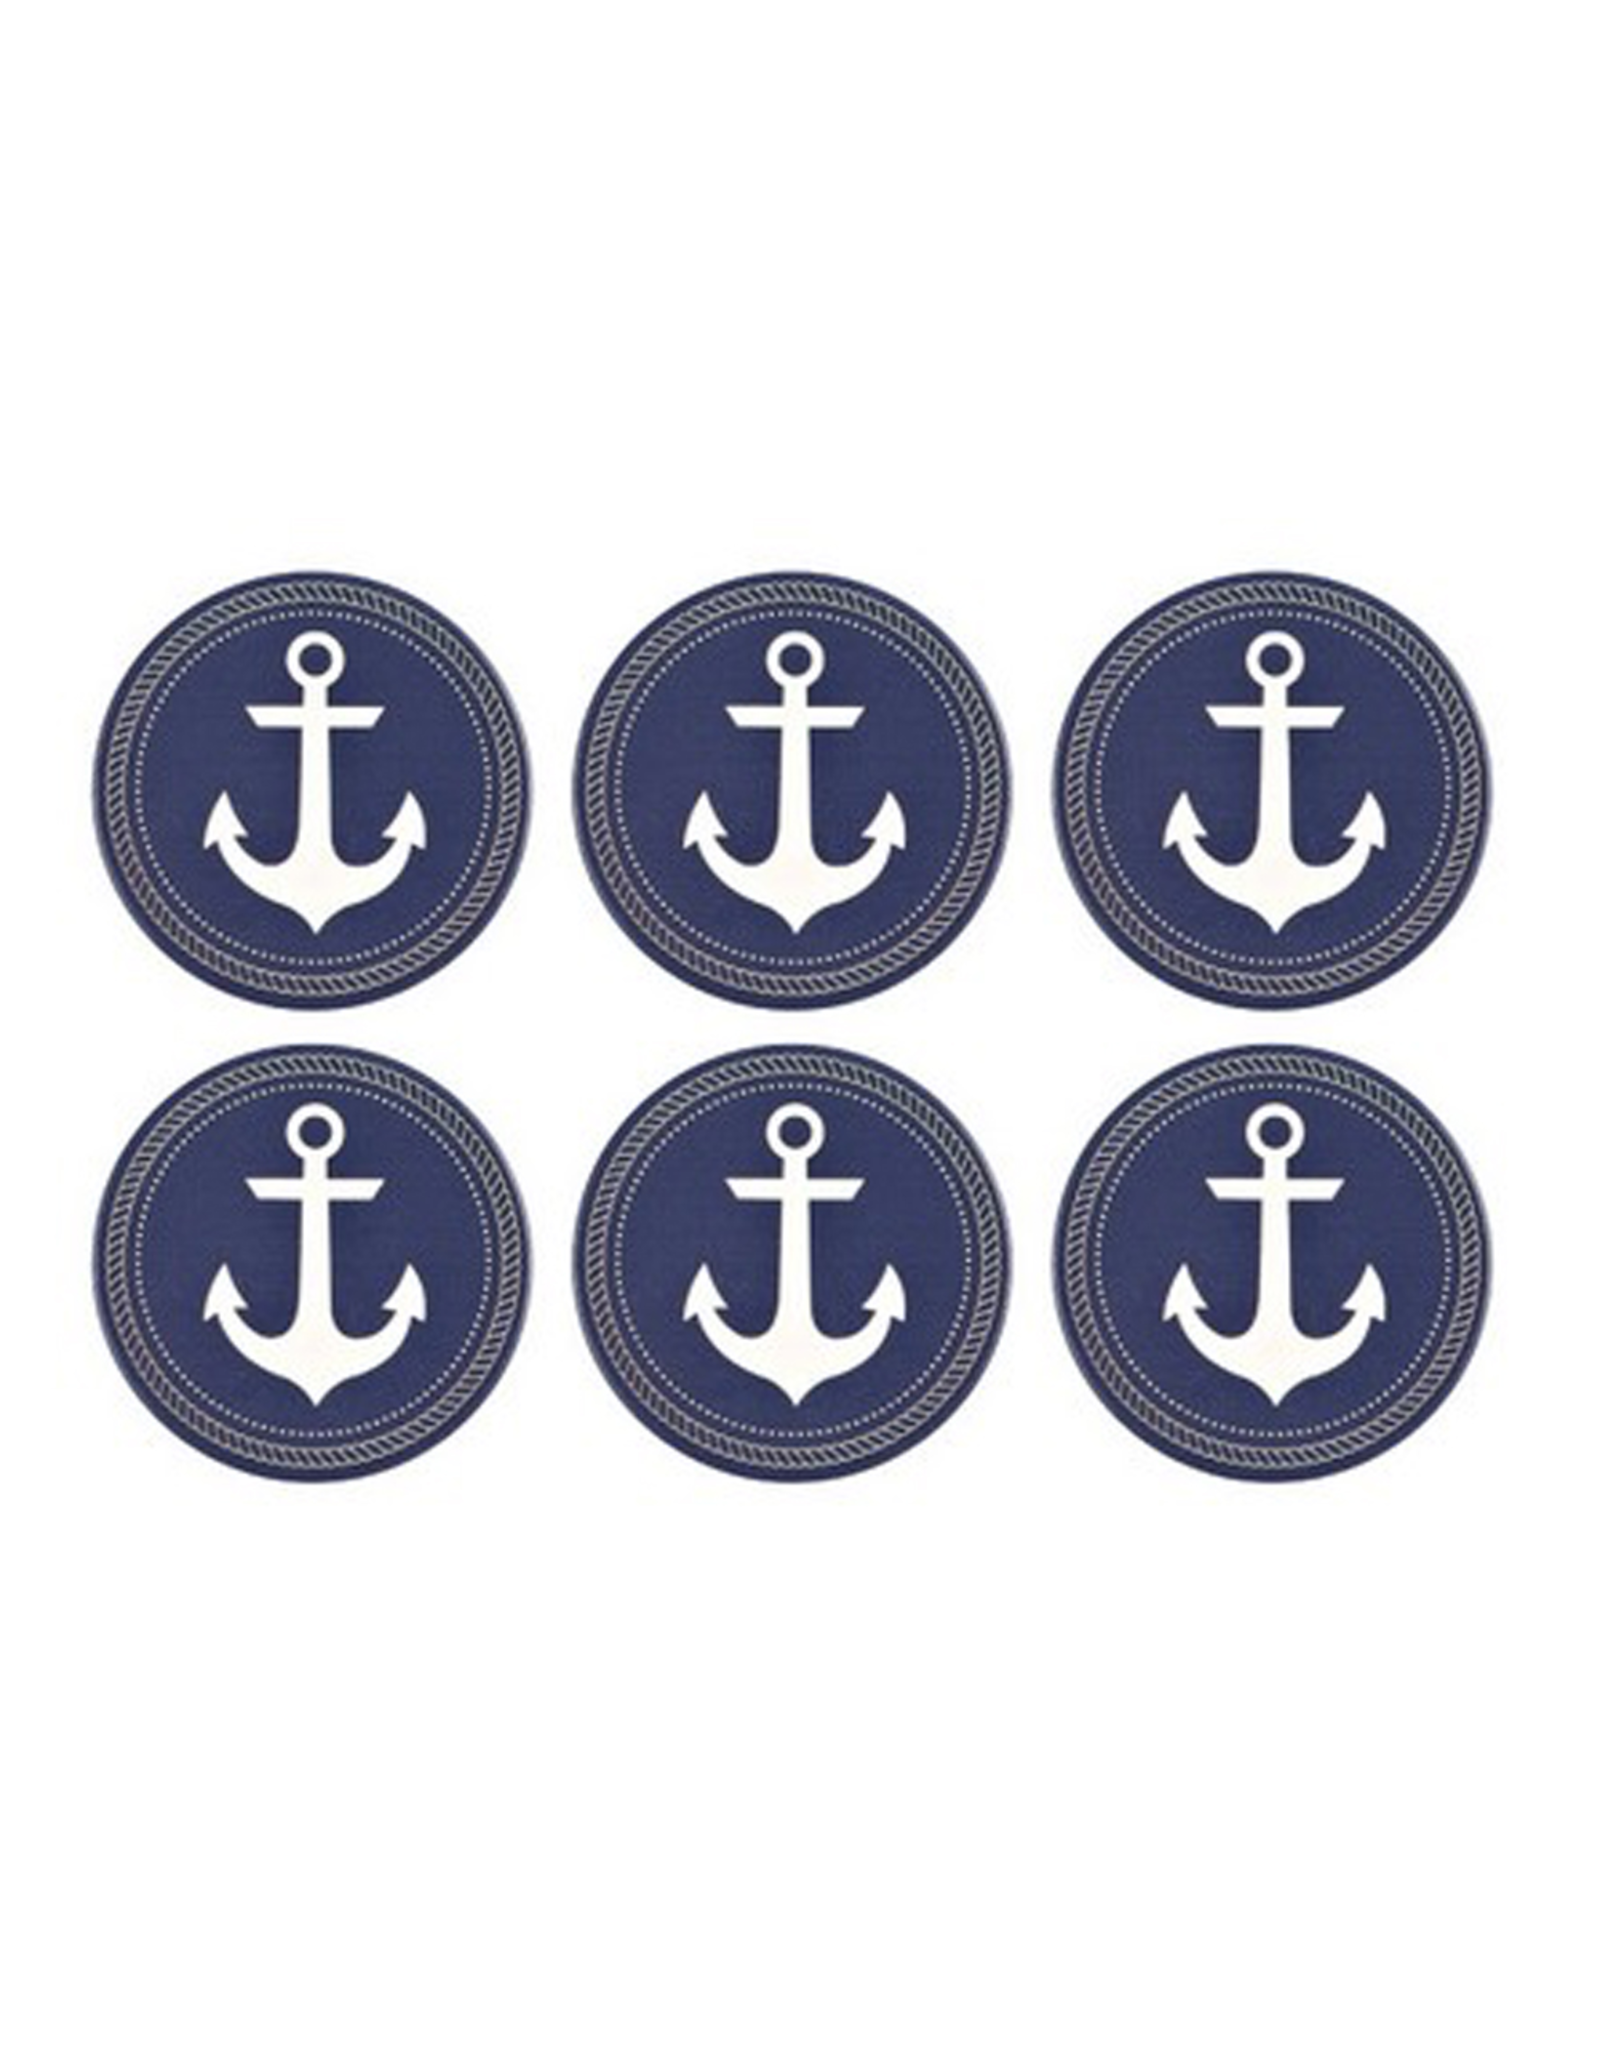 Ceramic Coasters Set of 6 Anchors Blue and White